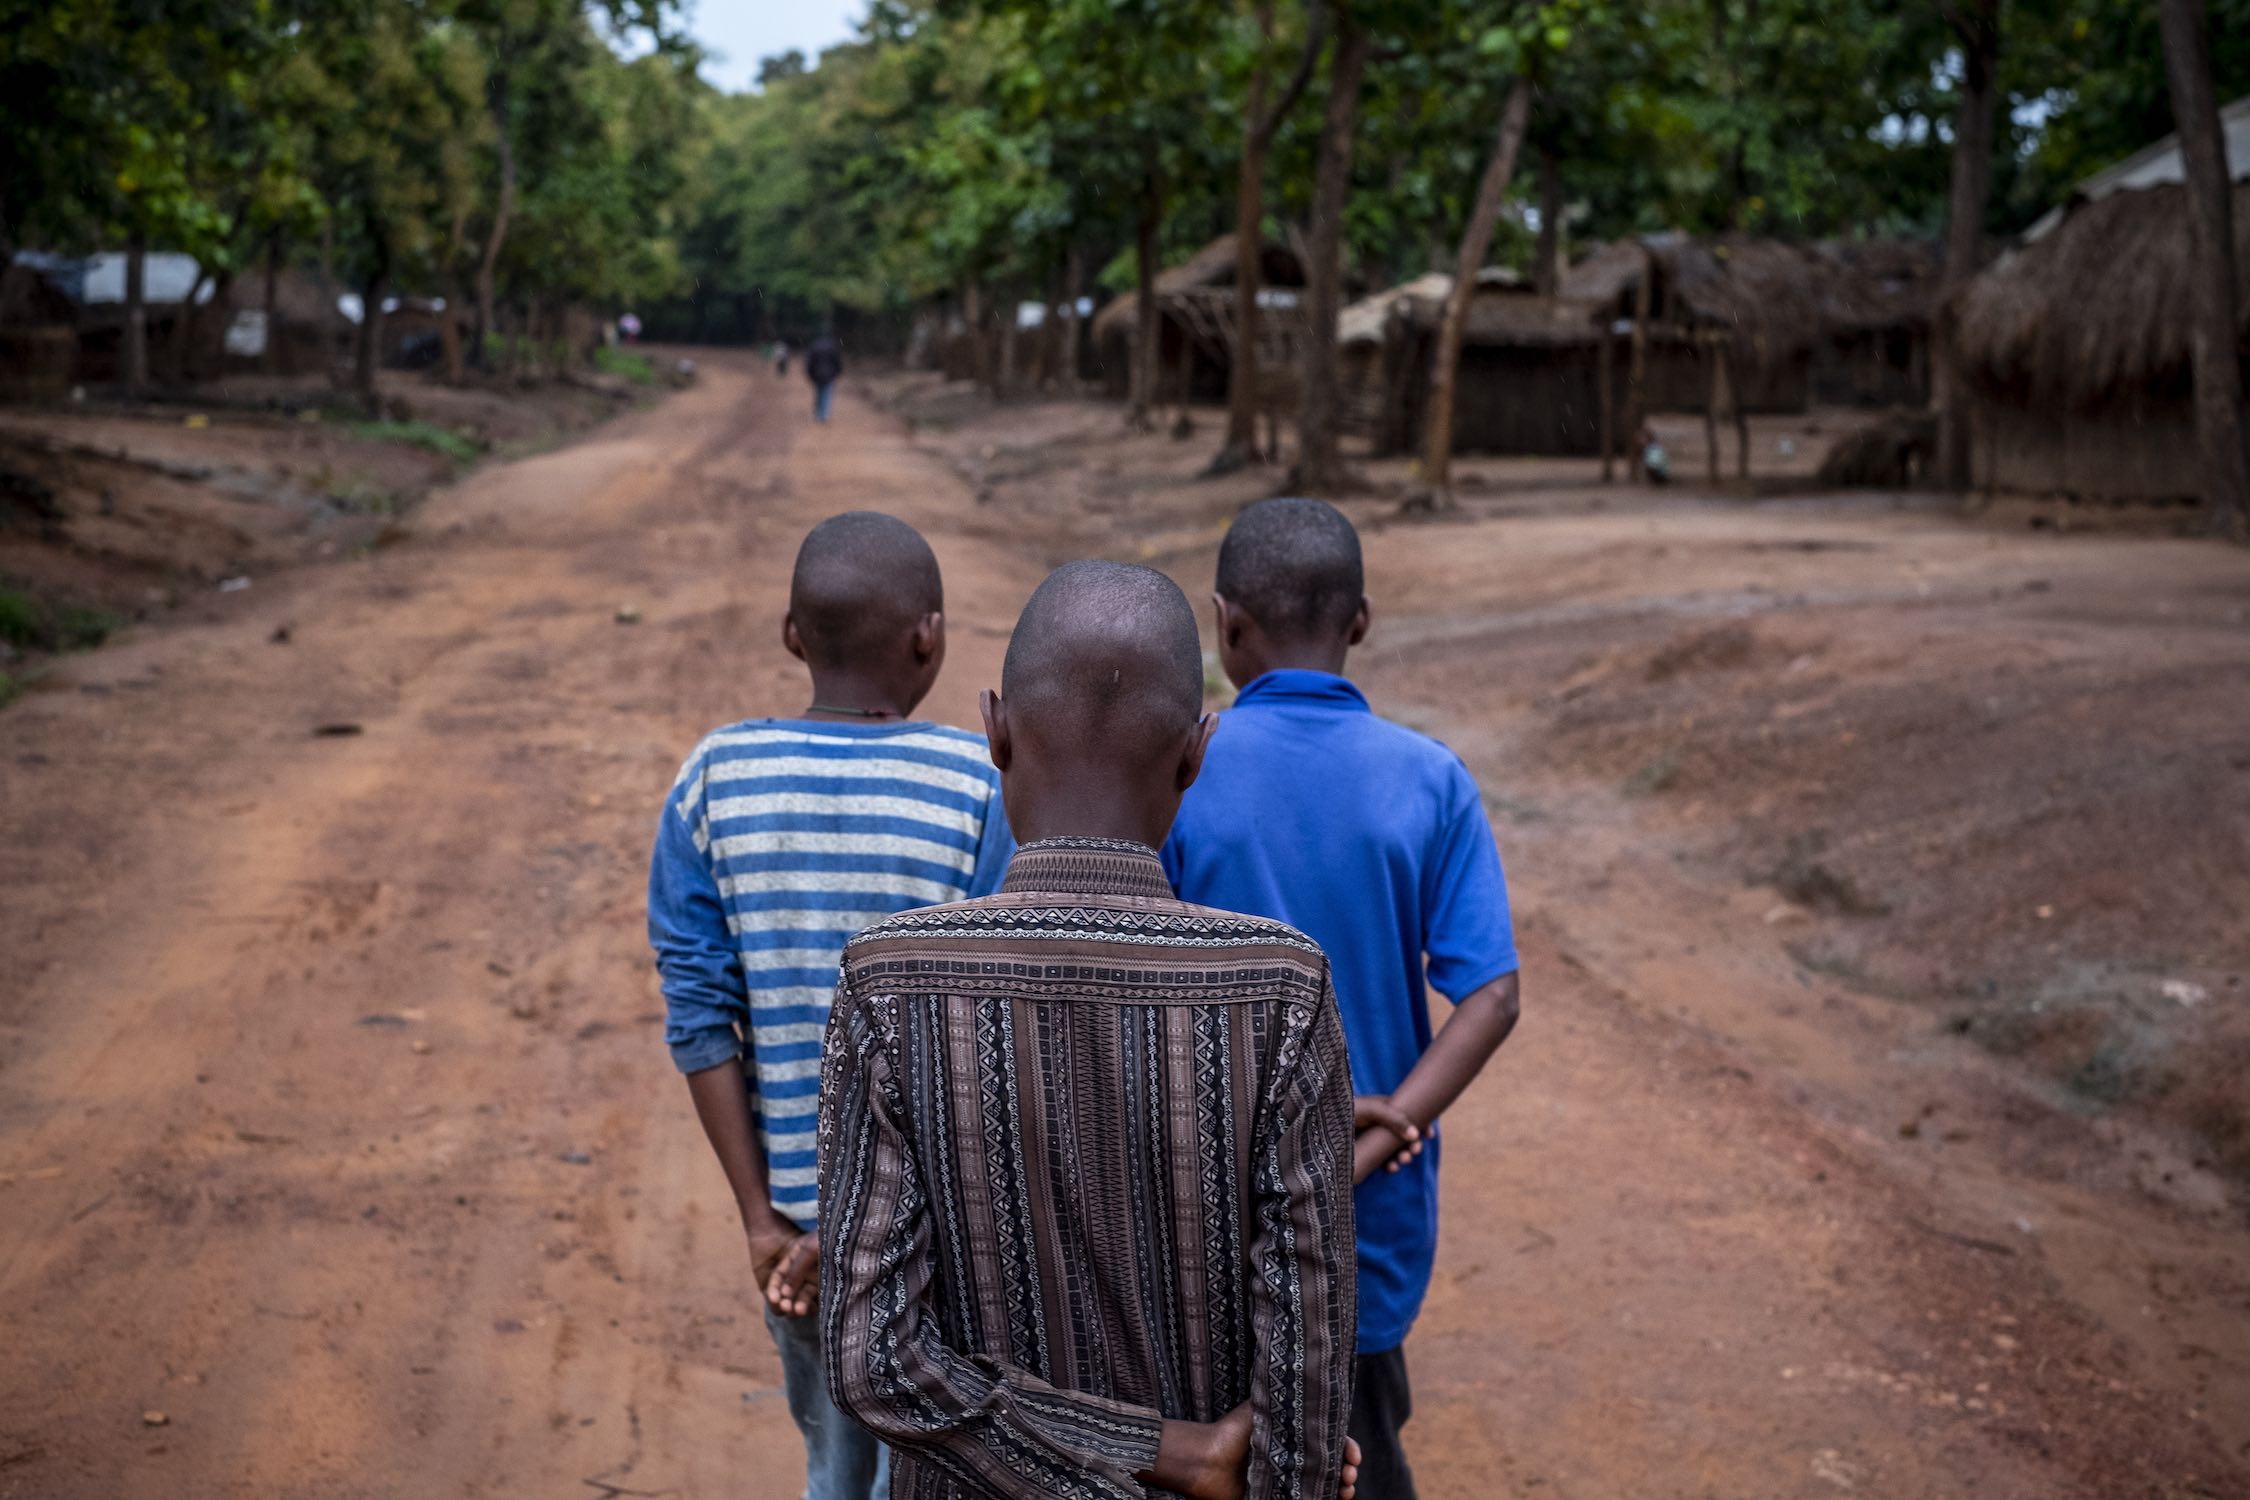 Three former child soldiers at Elevage camp in Bambari, Central African Republic